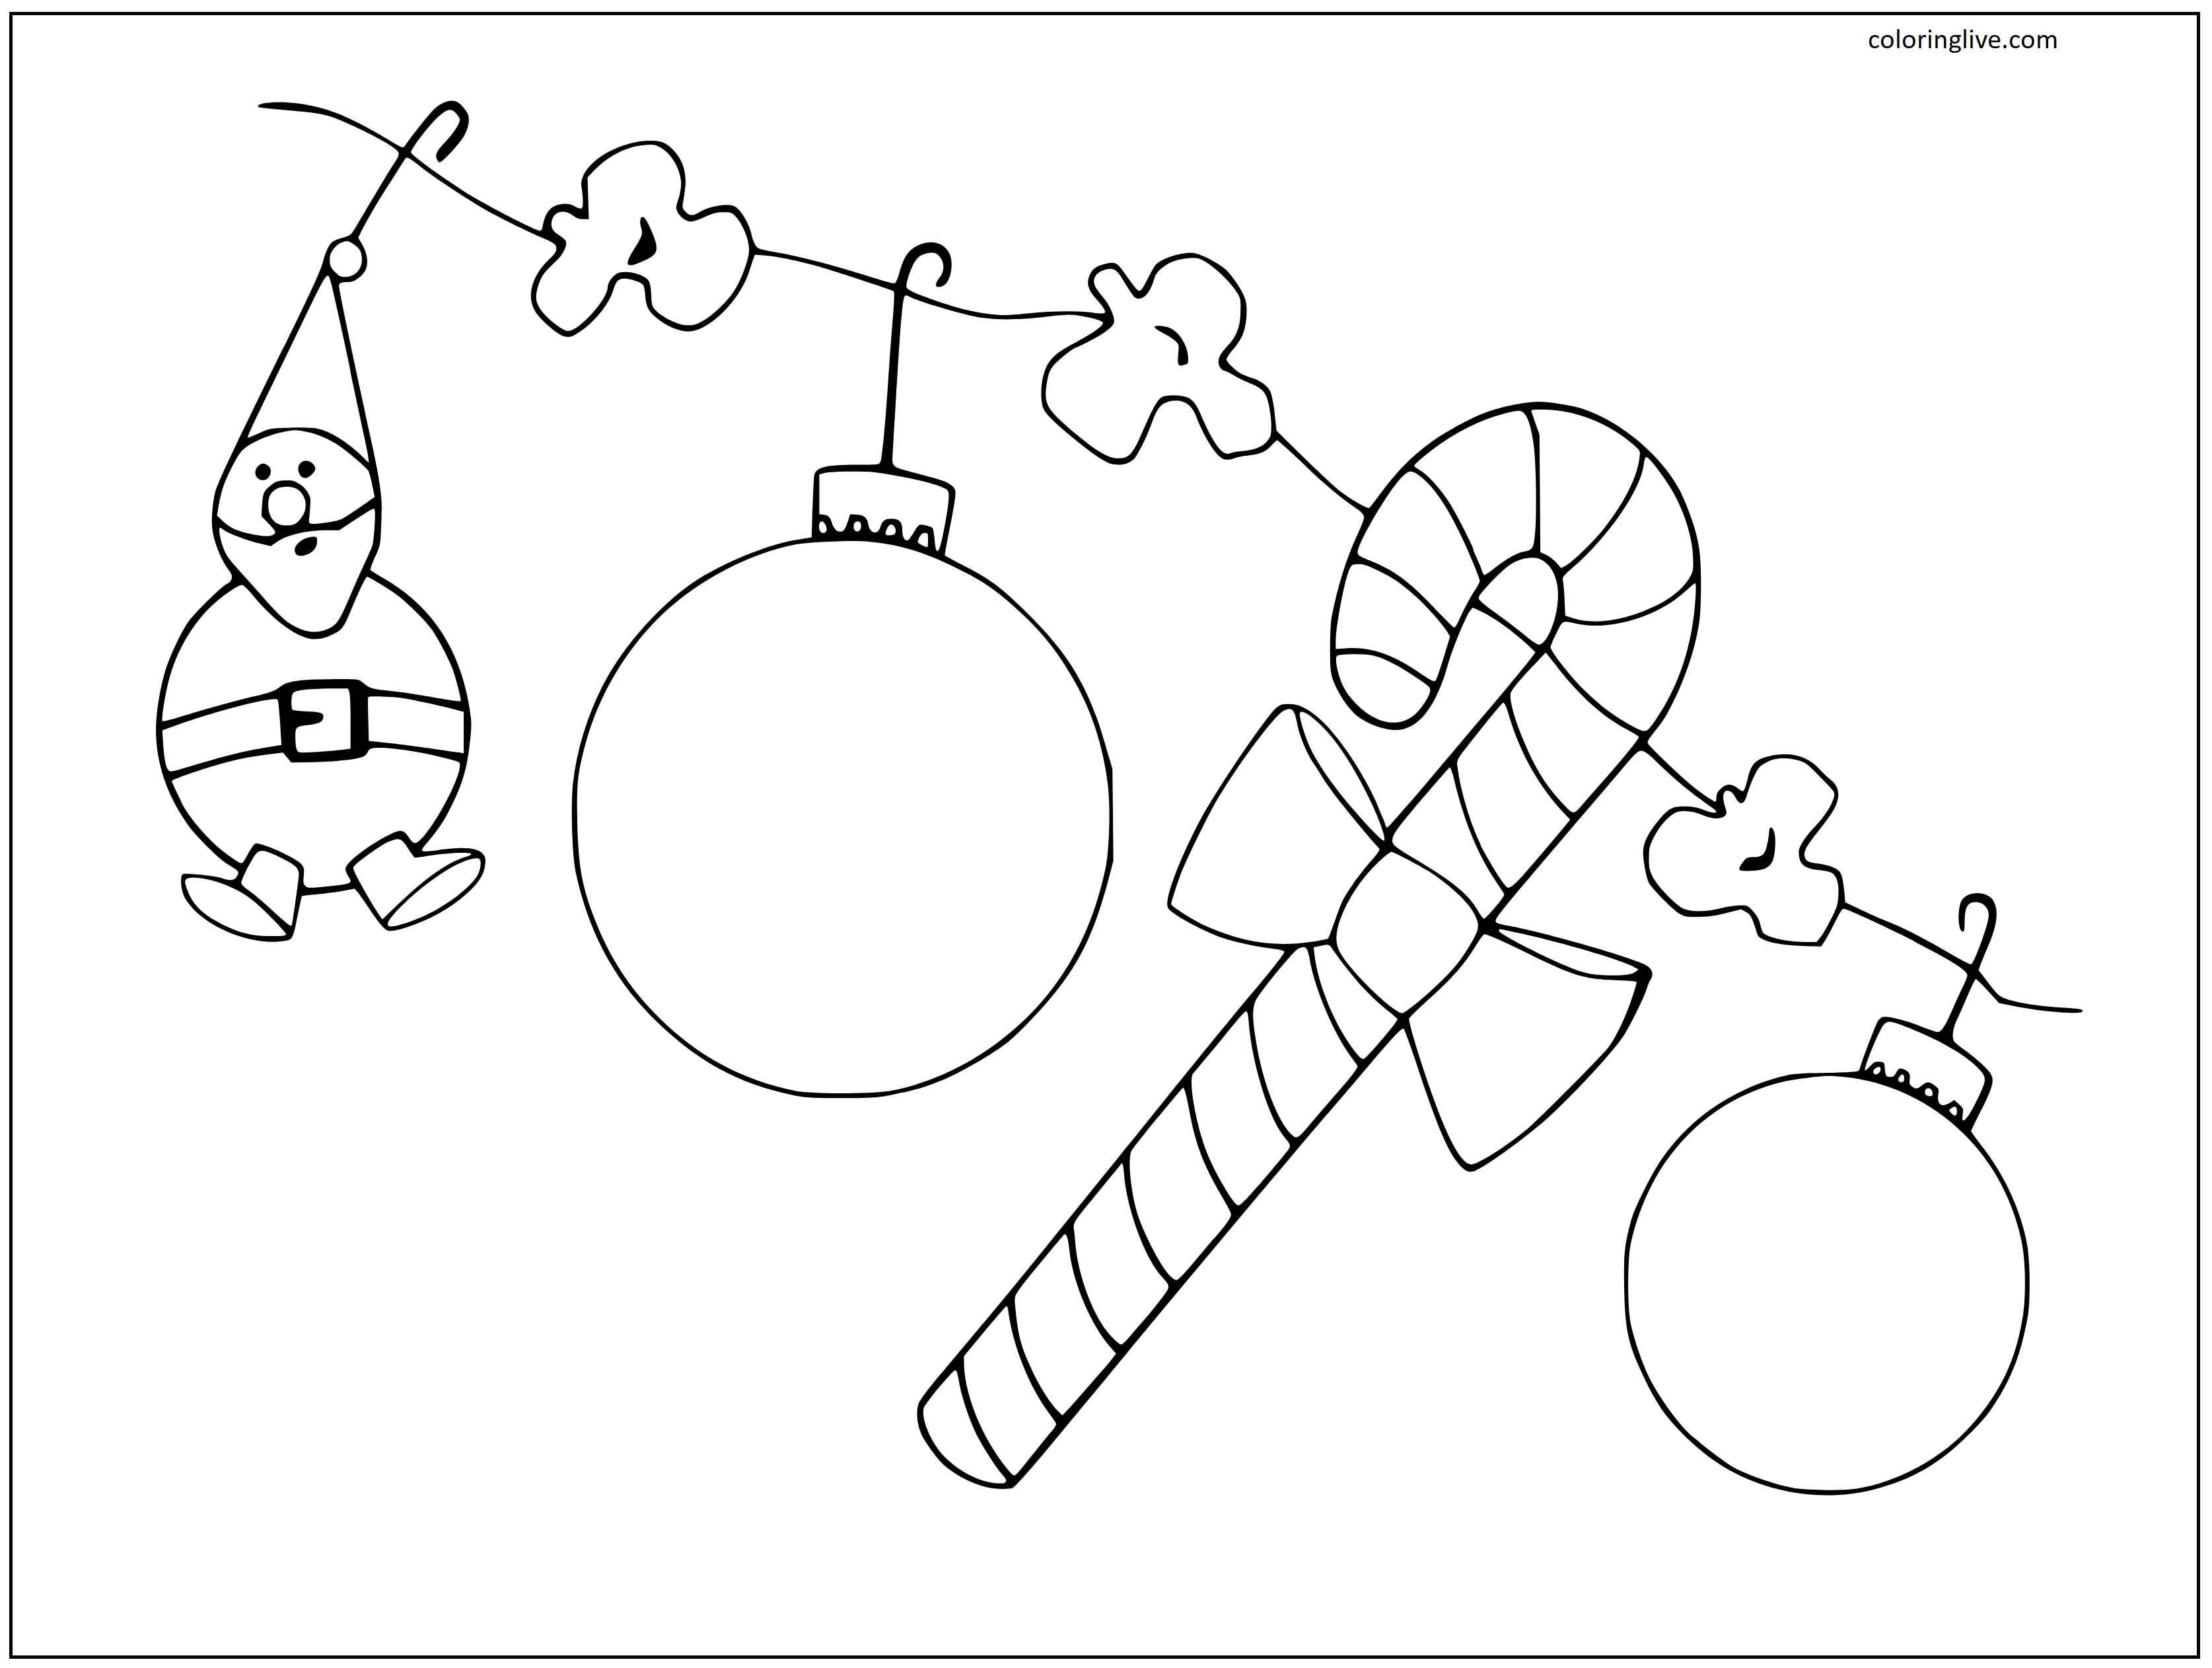 Printable Christmas Ornaments, Candy Cane, Bulbs Coloring Page for kids.